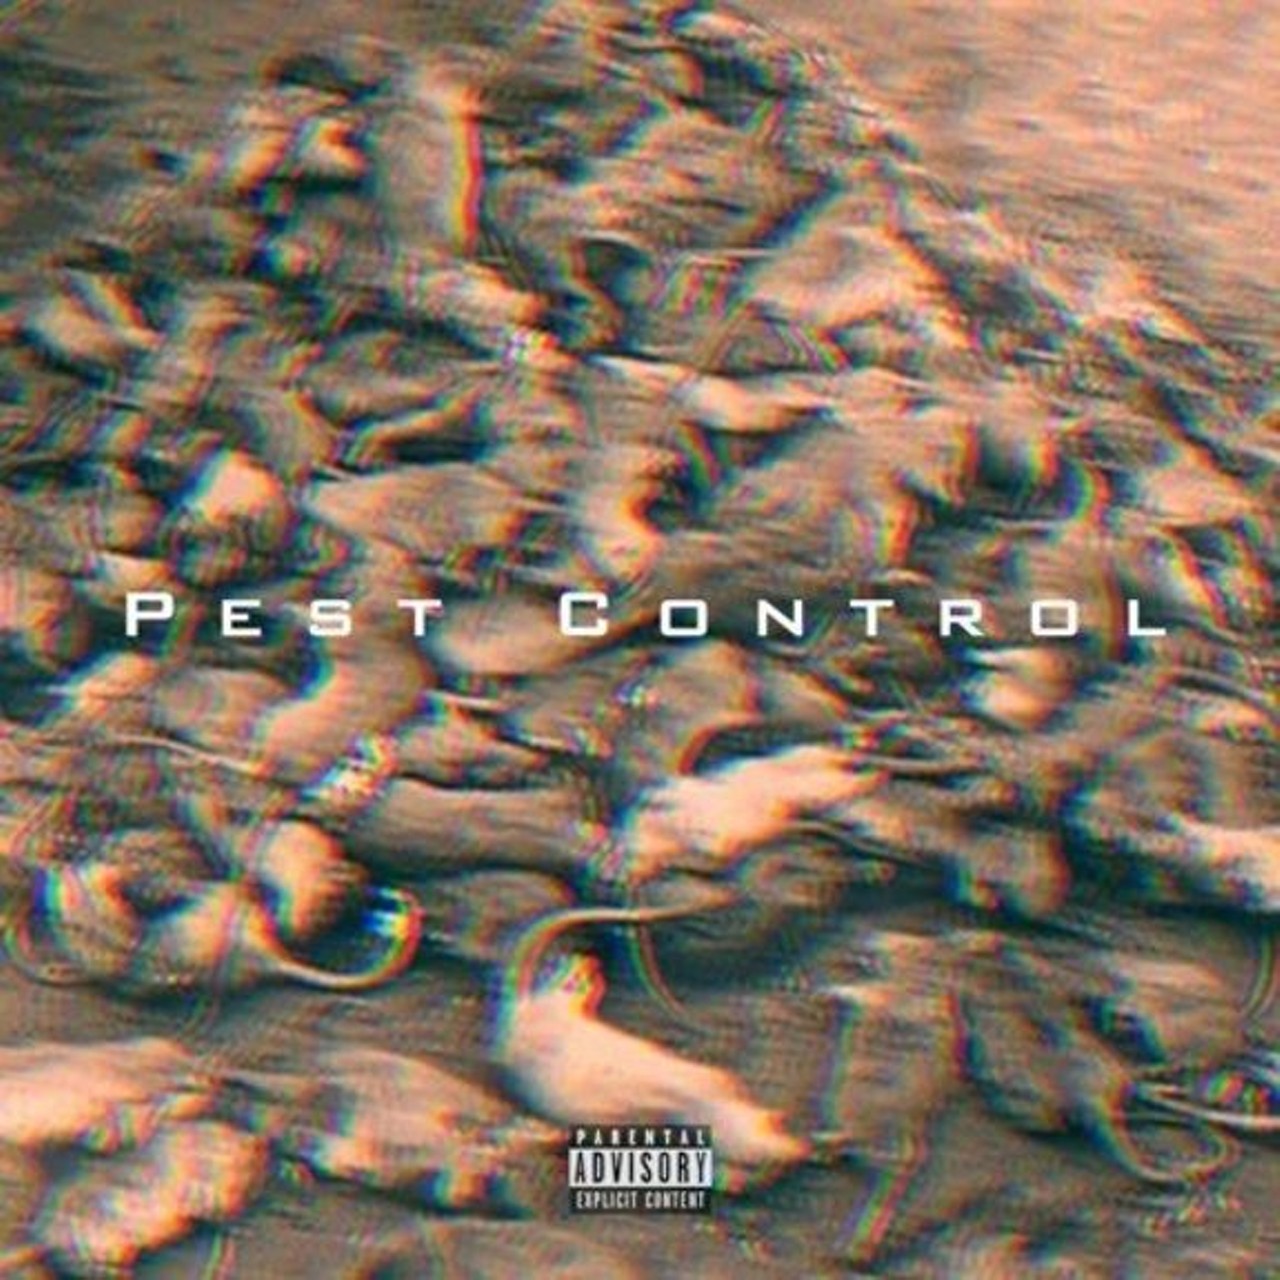 "Pest Control" by The Game 
It's a wrap, red khakis, red Cincinnati
I'ma see you in the streets, don't at me